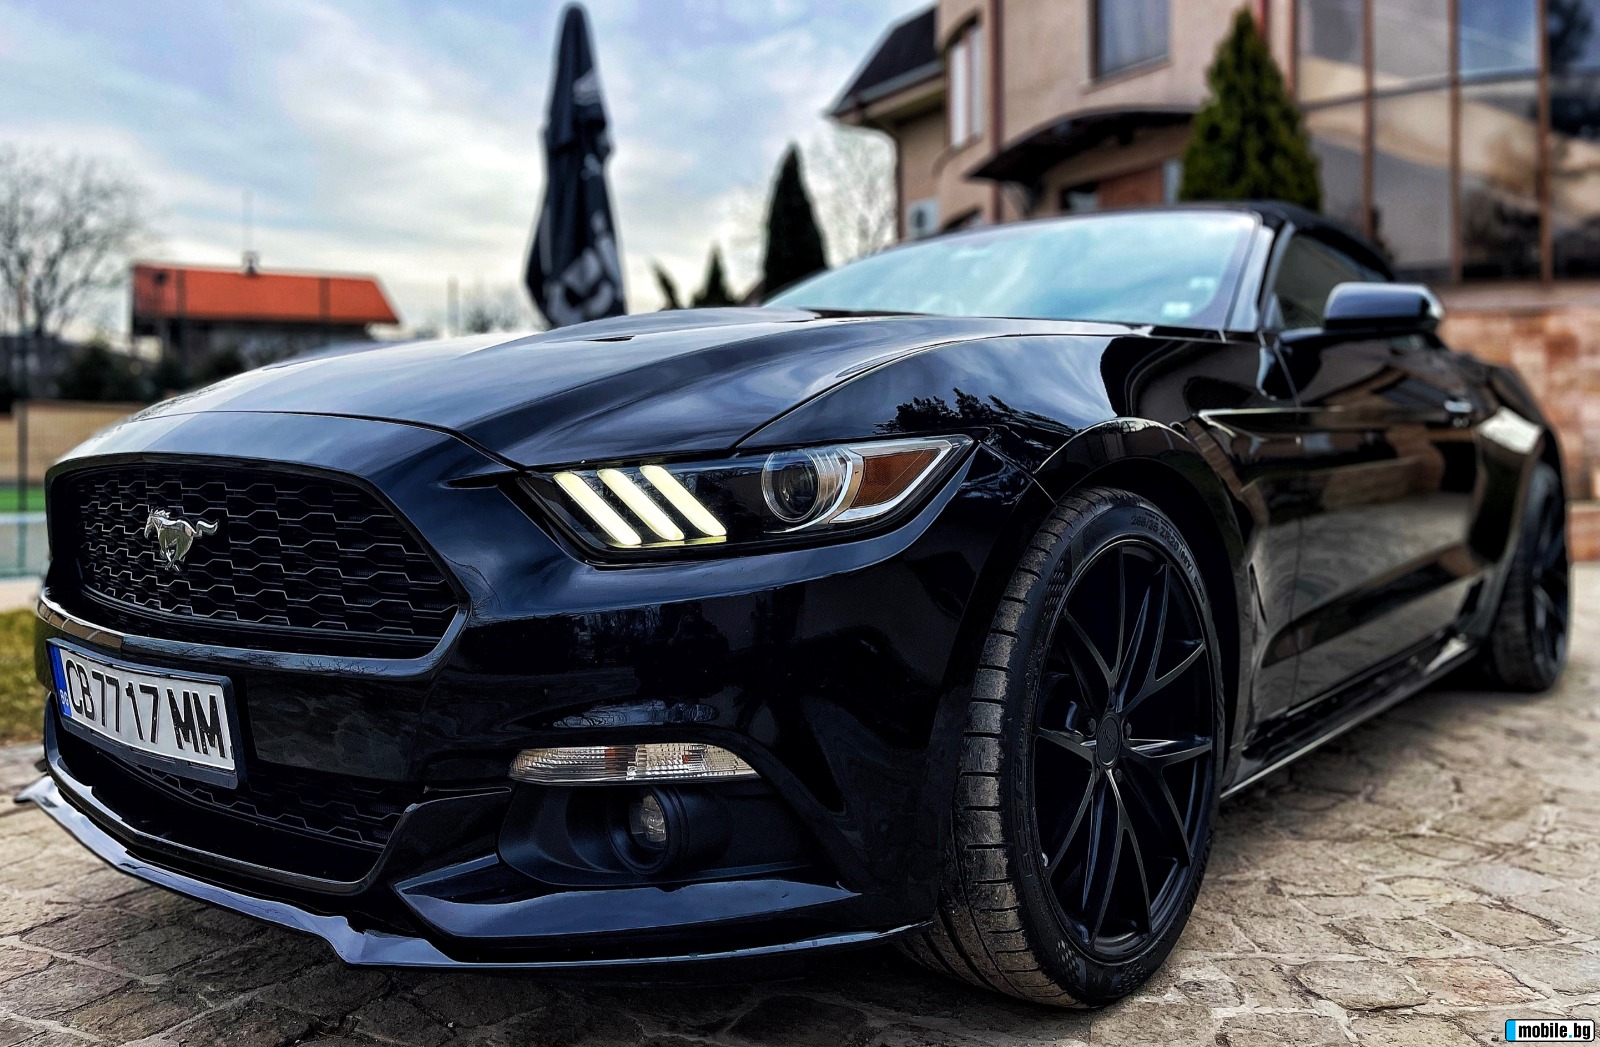 Ford Mustang CABRIO | Mobile.bg   4